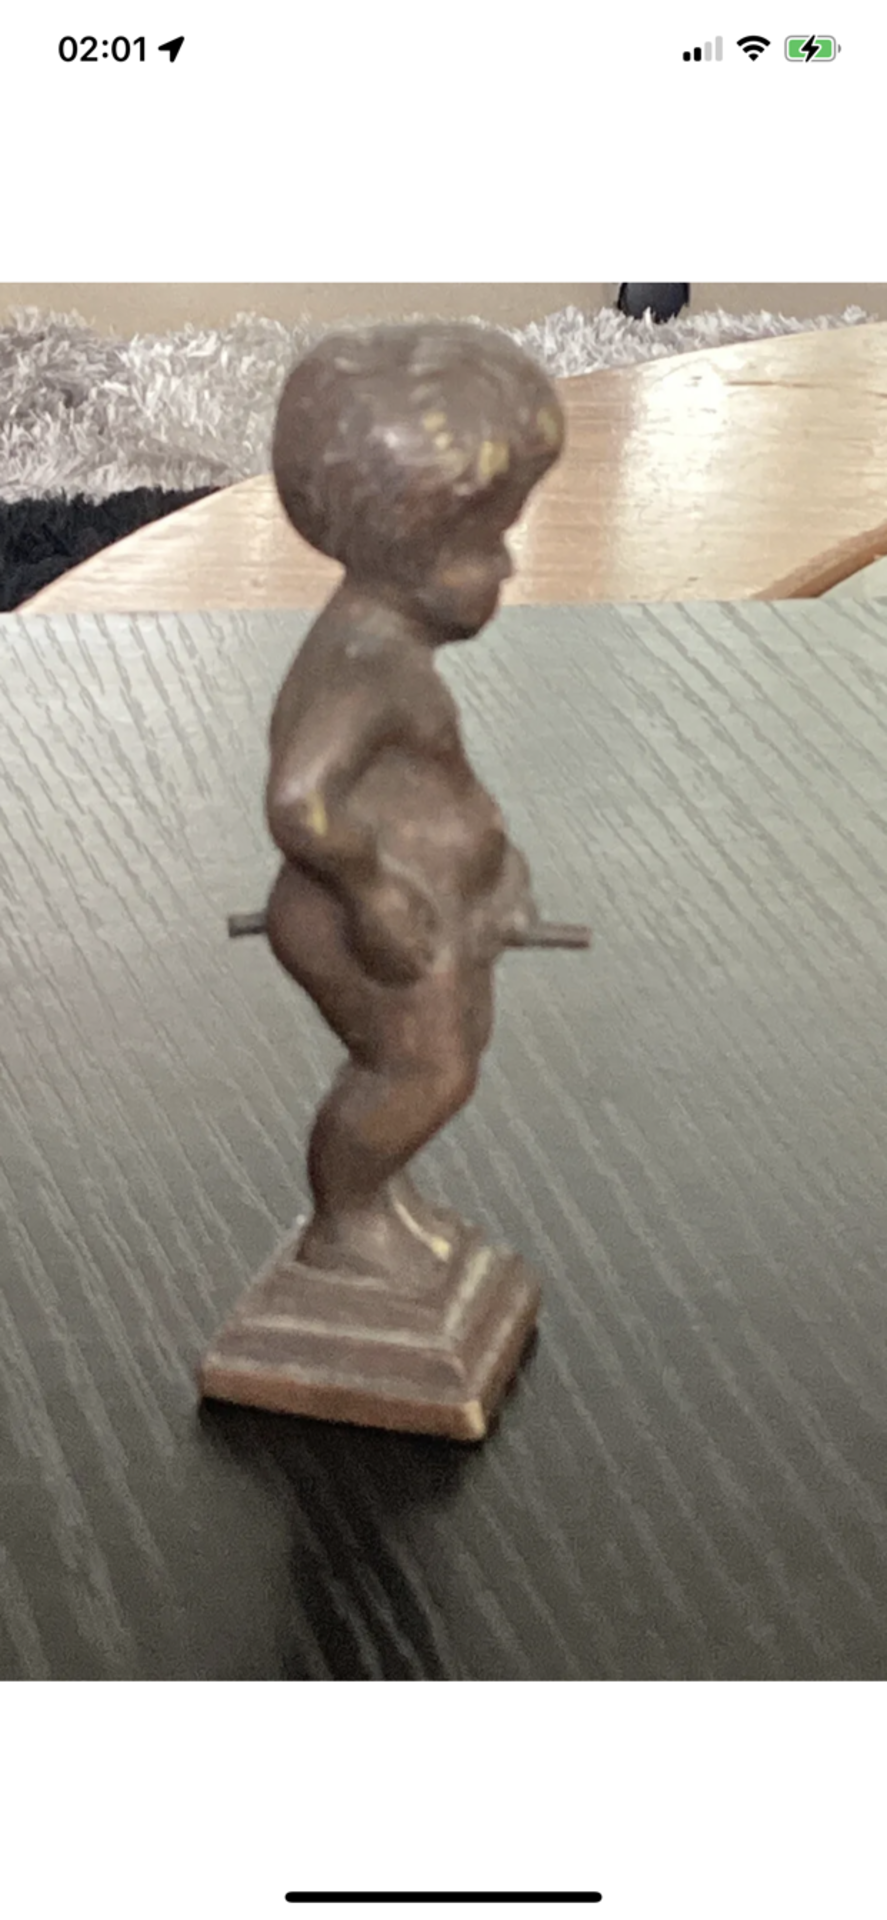 SMASLL ANTIQUE BRONZE CHERUB WITH SPOUT - Image 2 of 7